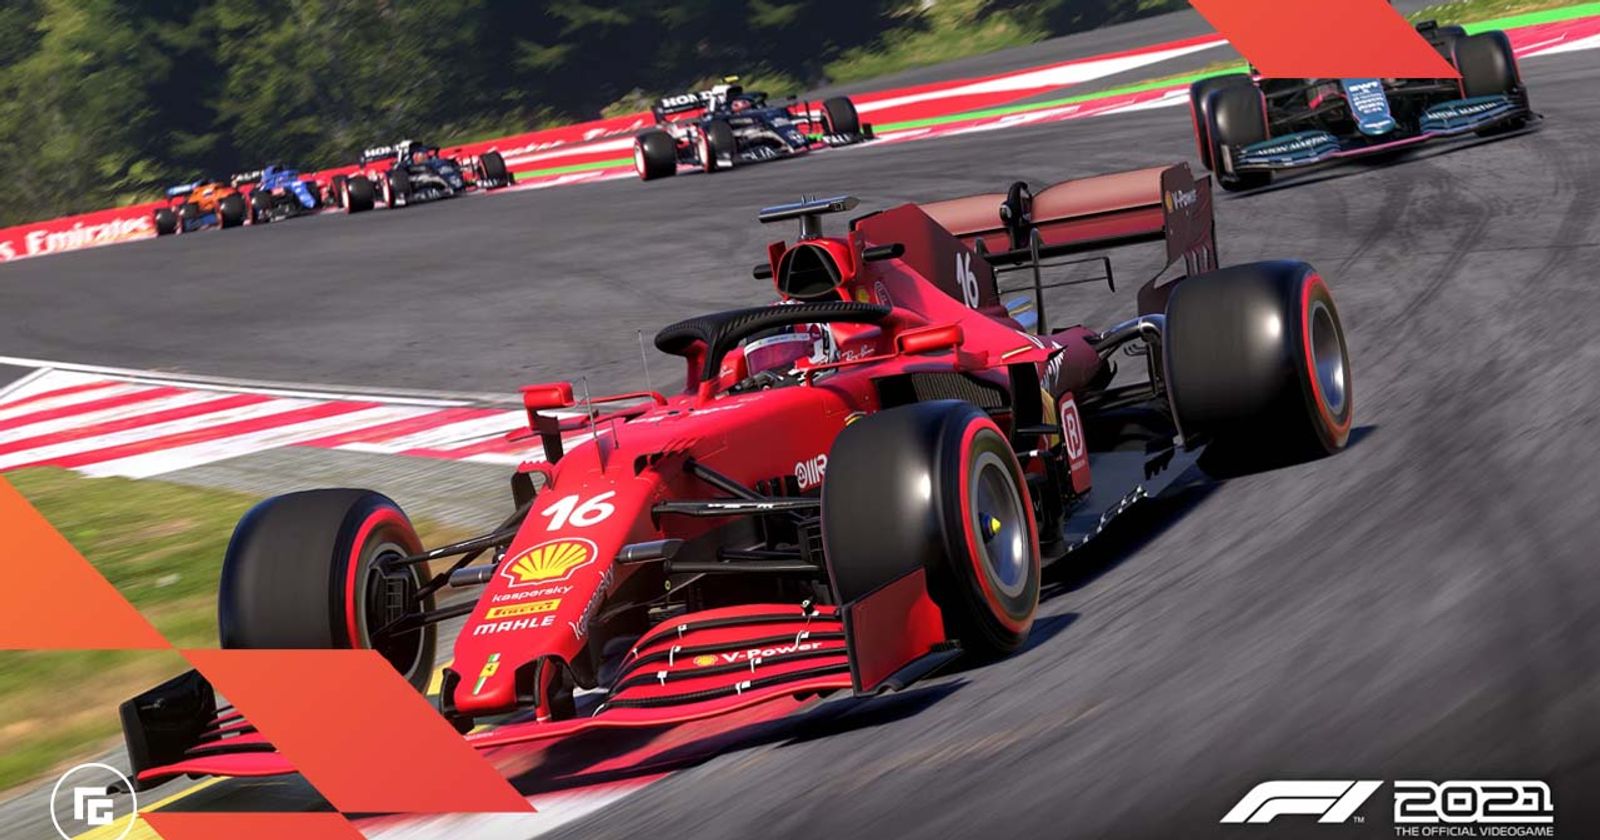 F1 2022 to feature supercars & cross-play, but no story mode - Xfire